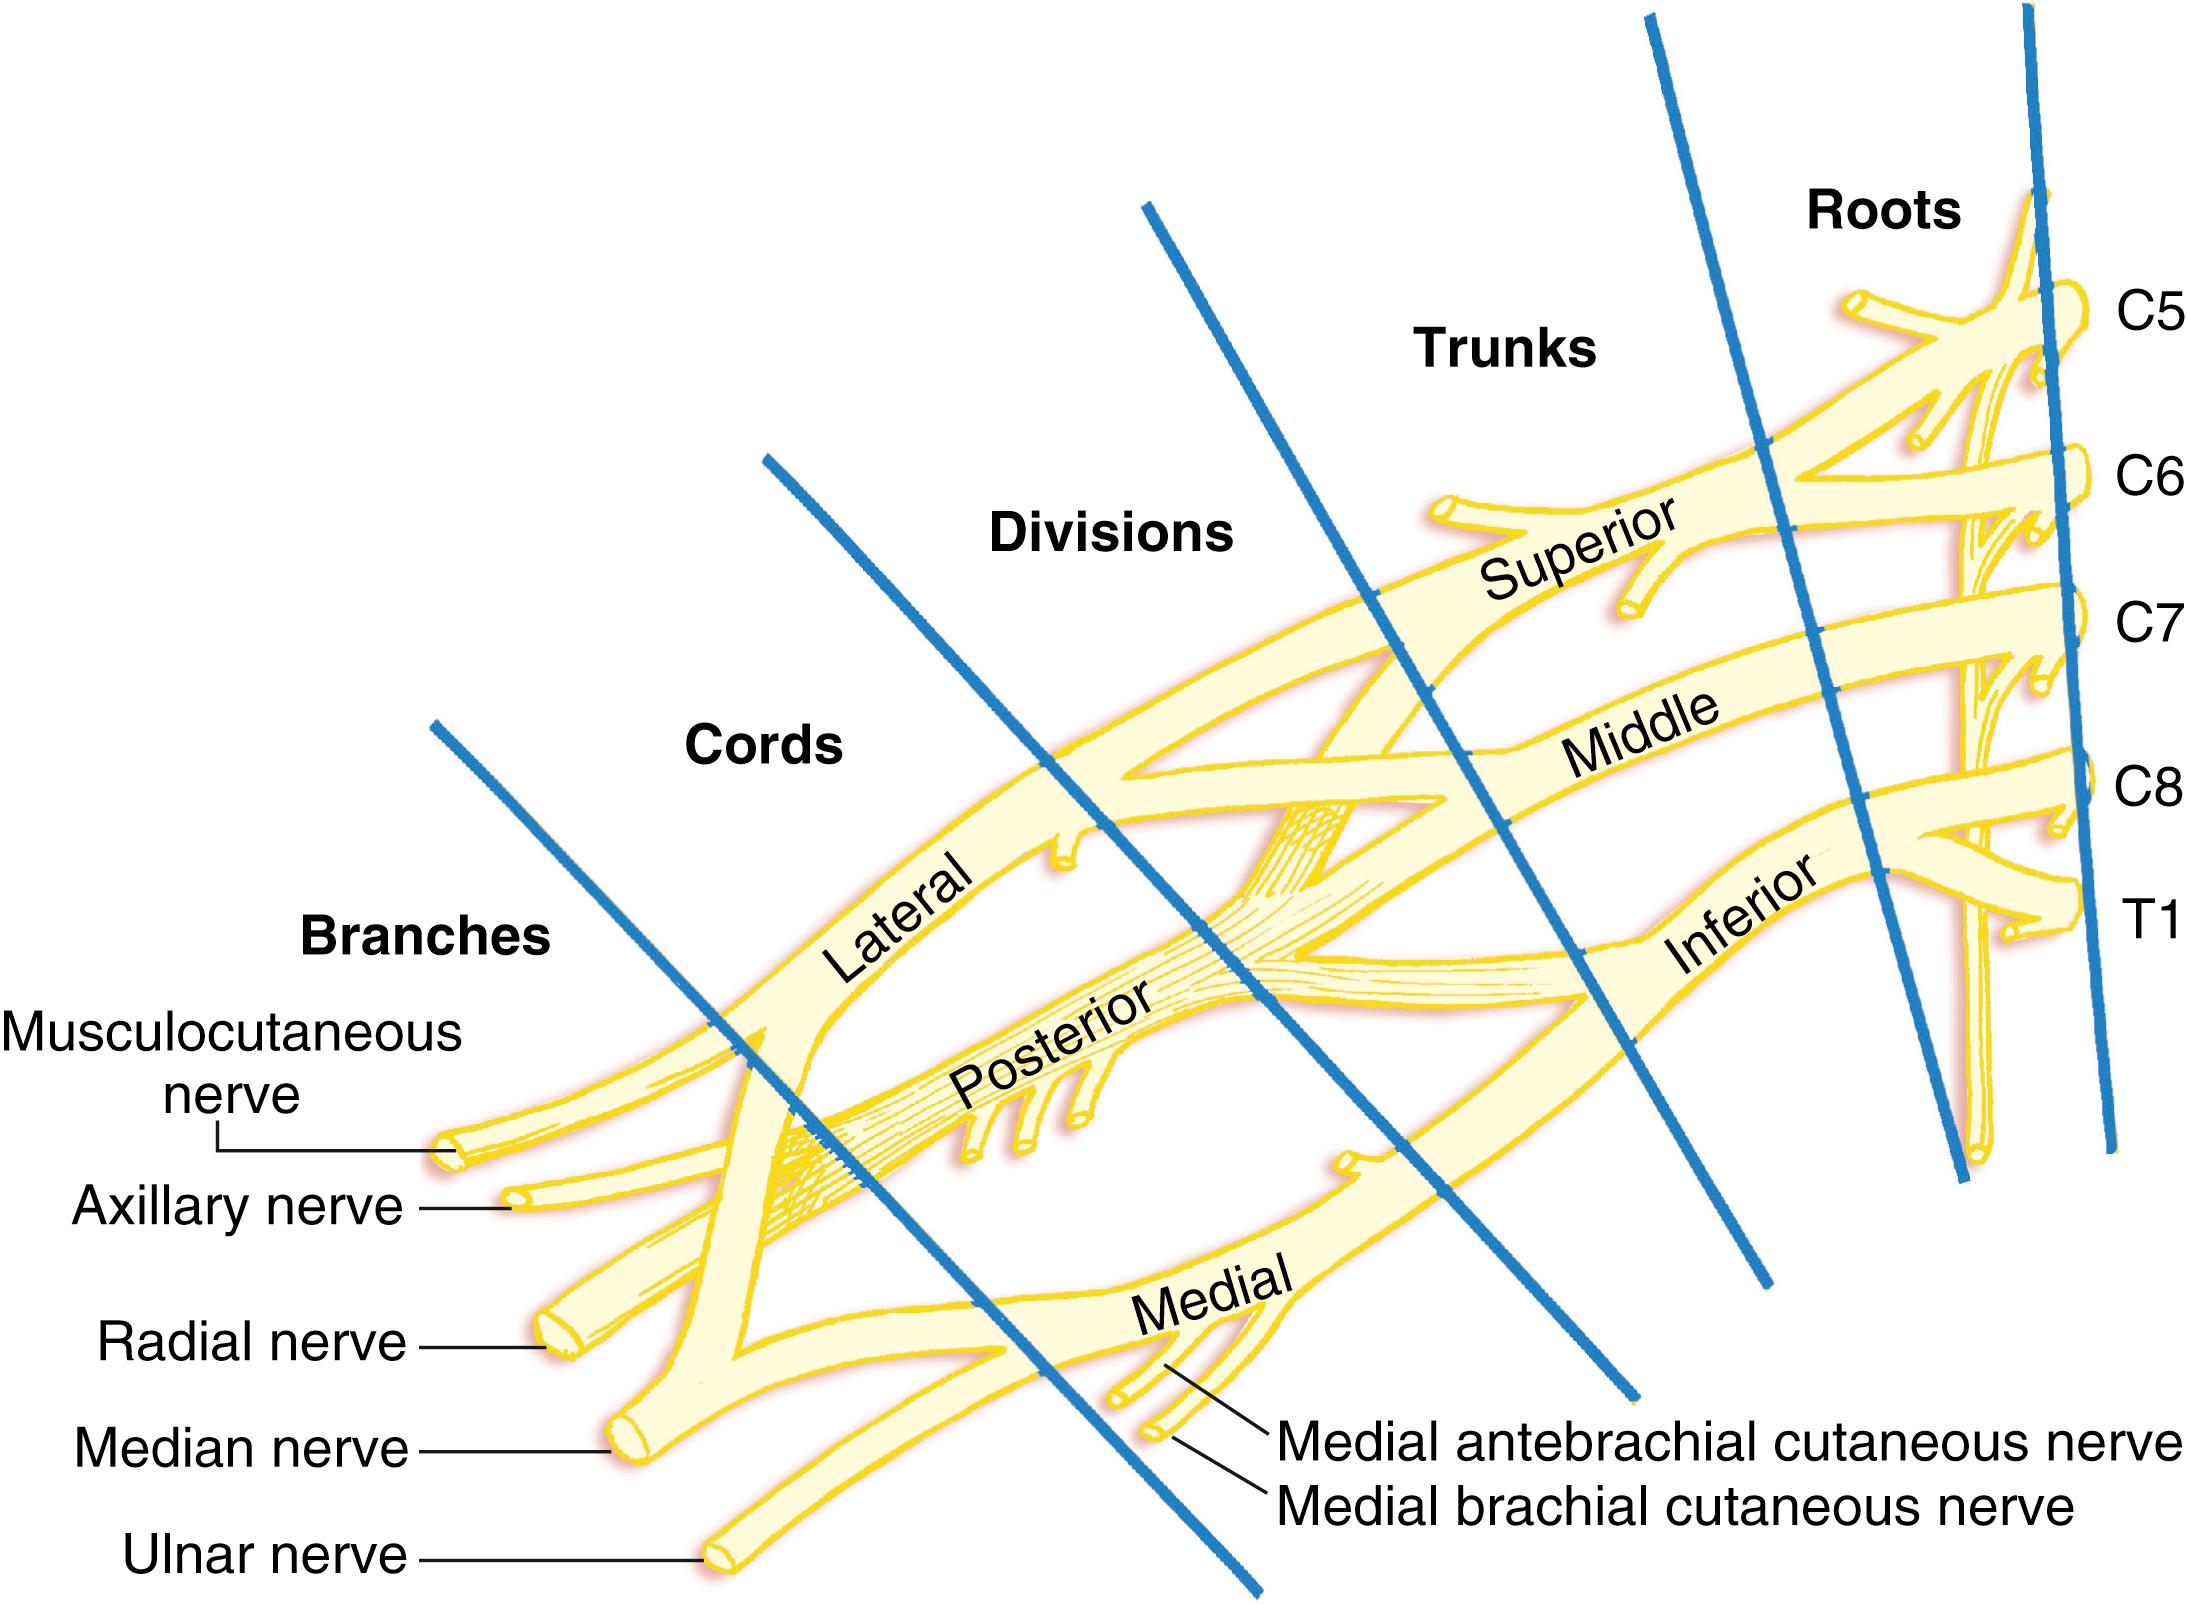 Fig. 46.16, Roots, trunks, divisions, cords, and branches of the brachial plexus.